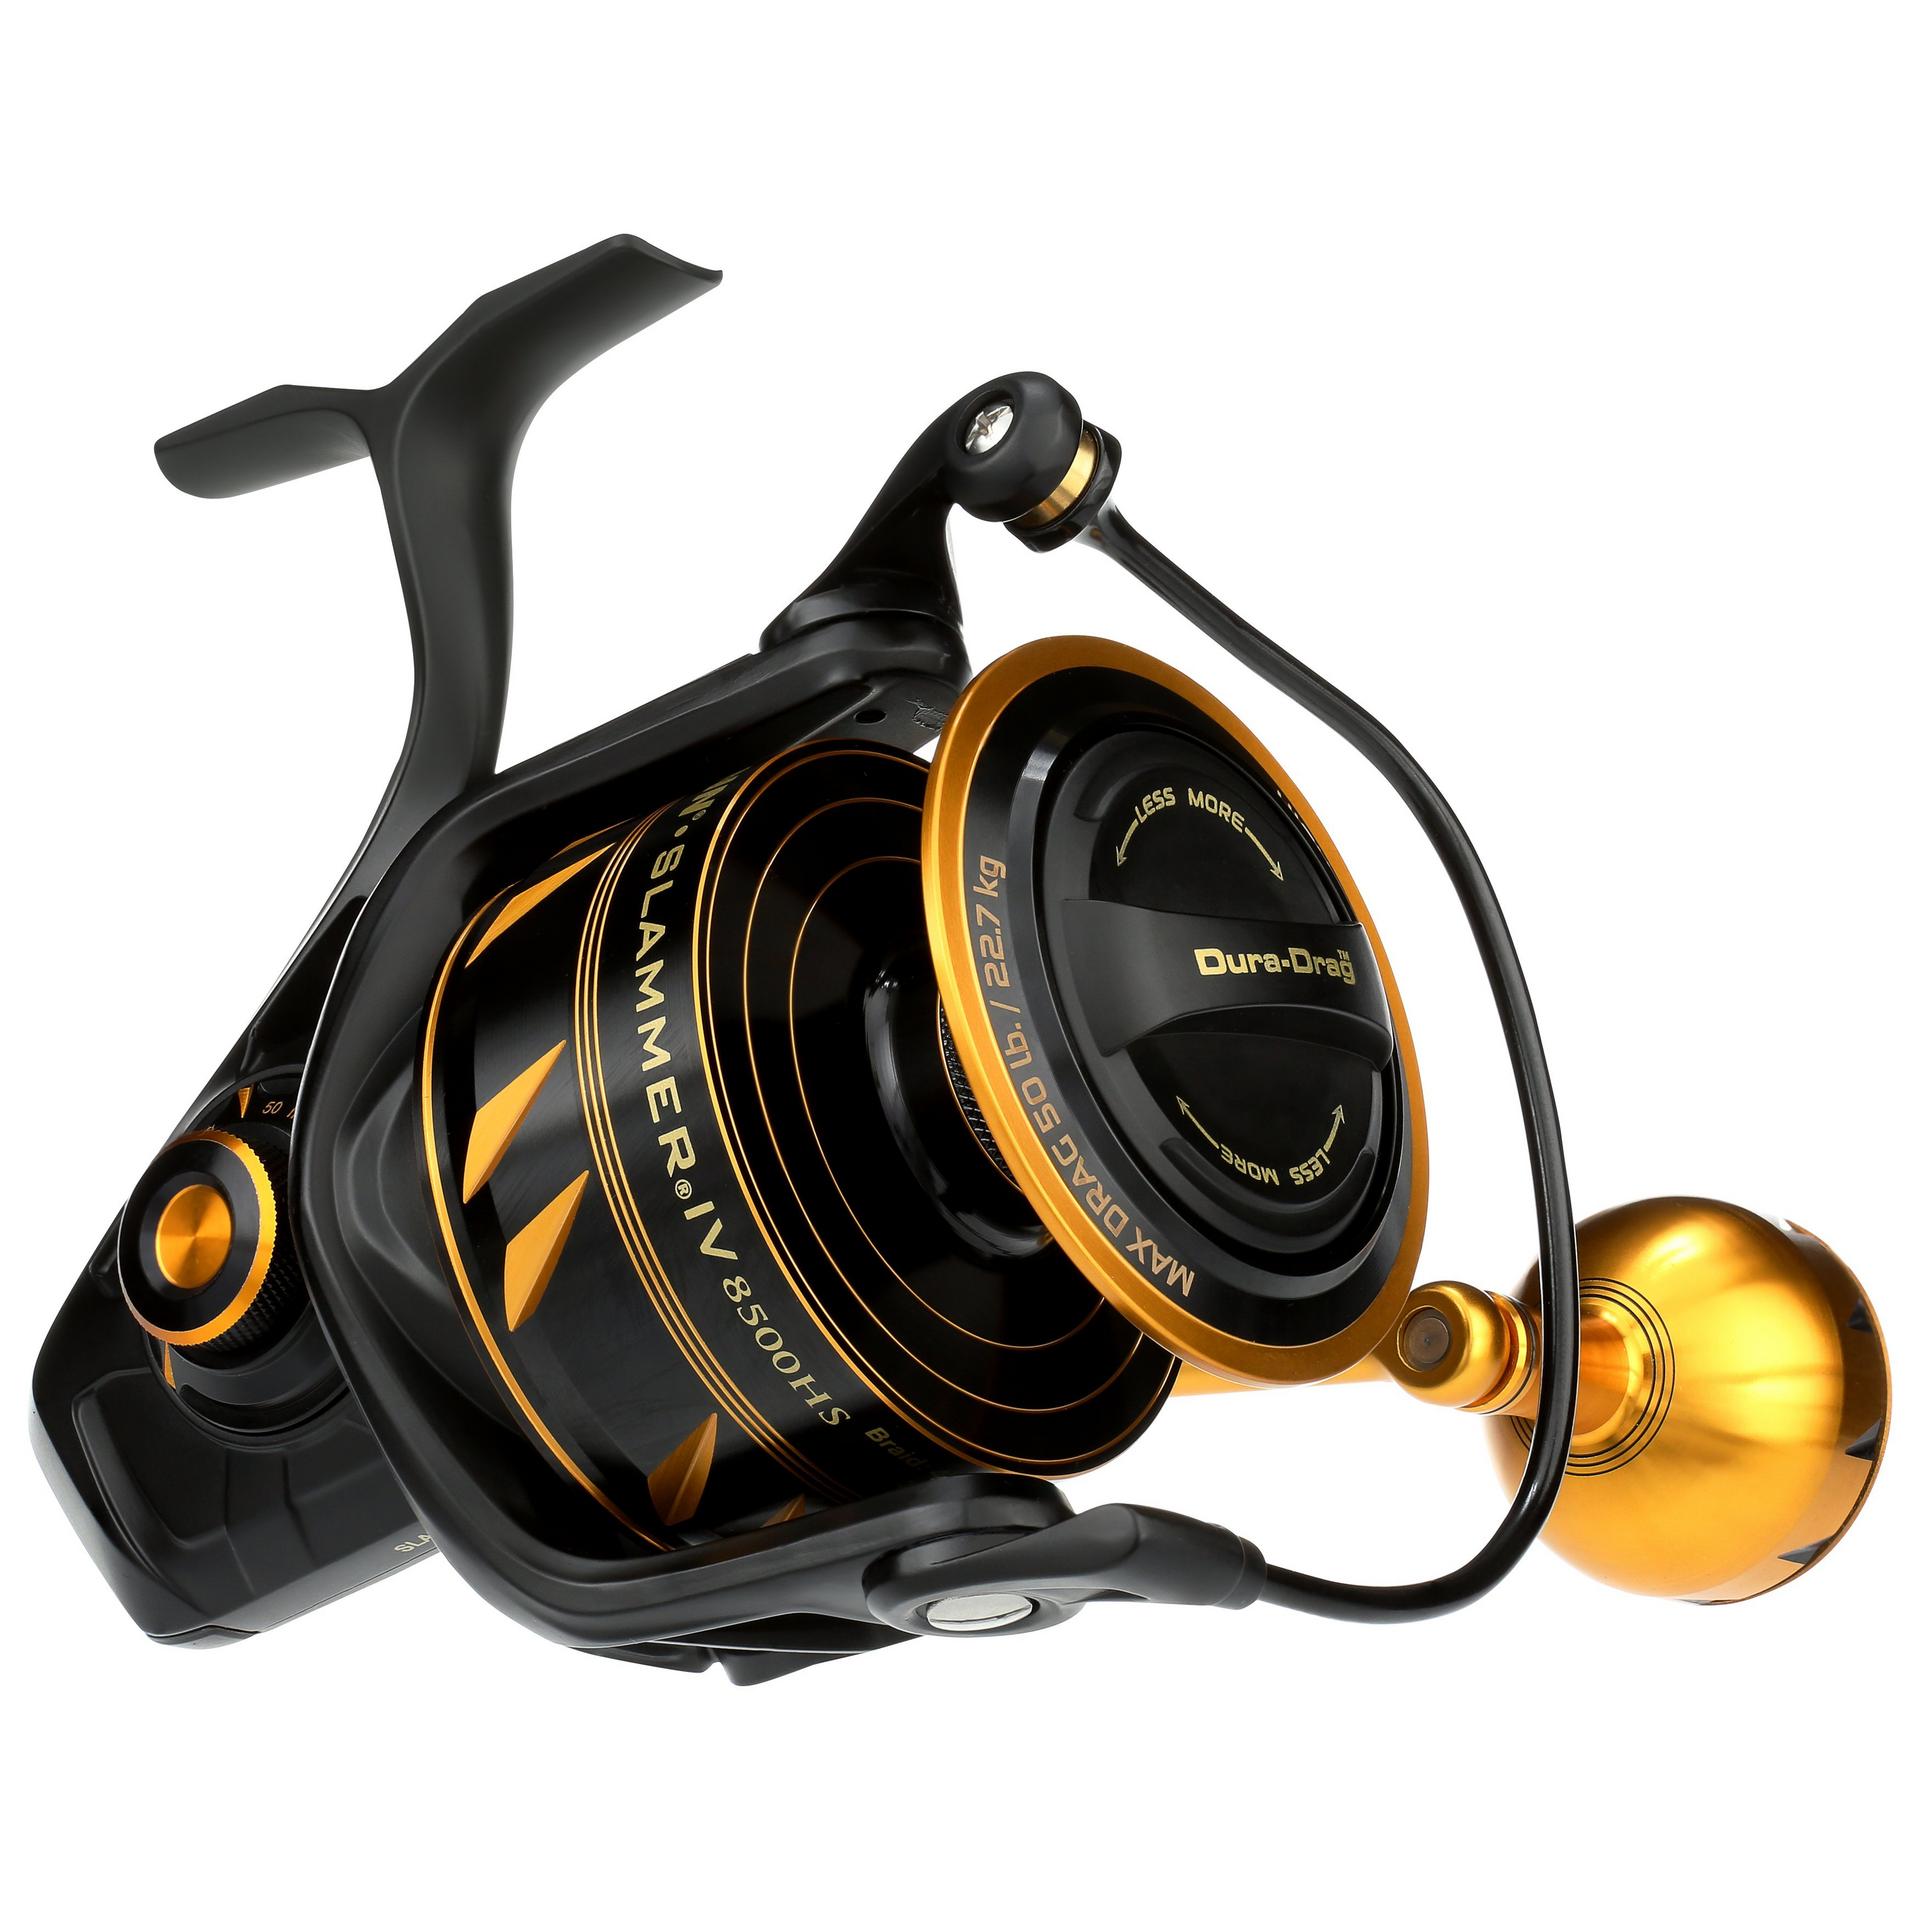 Shakespeare Mach III Spinning Reel 2000 size 1537779 £43.99 at